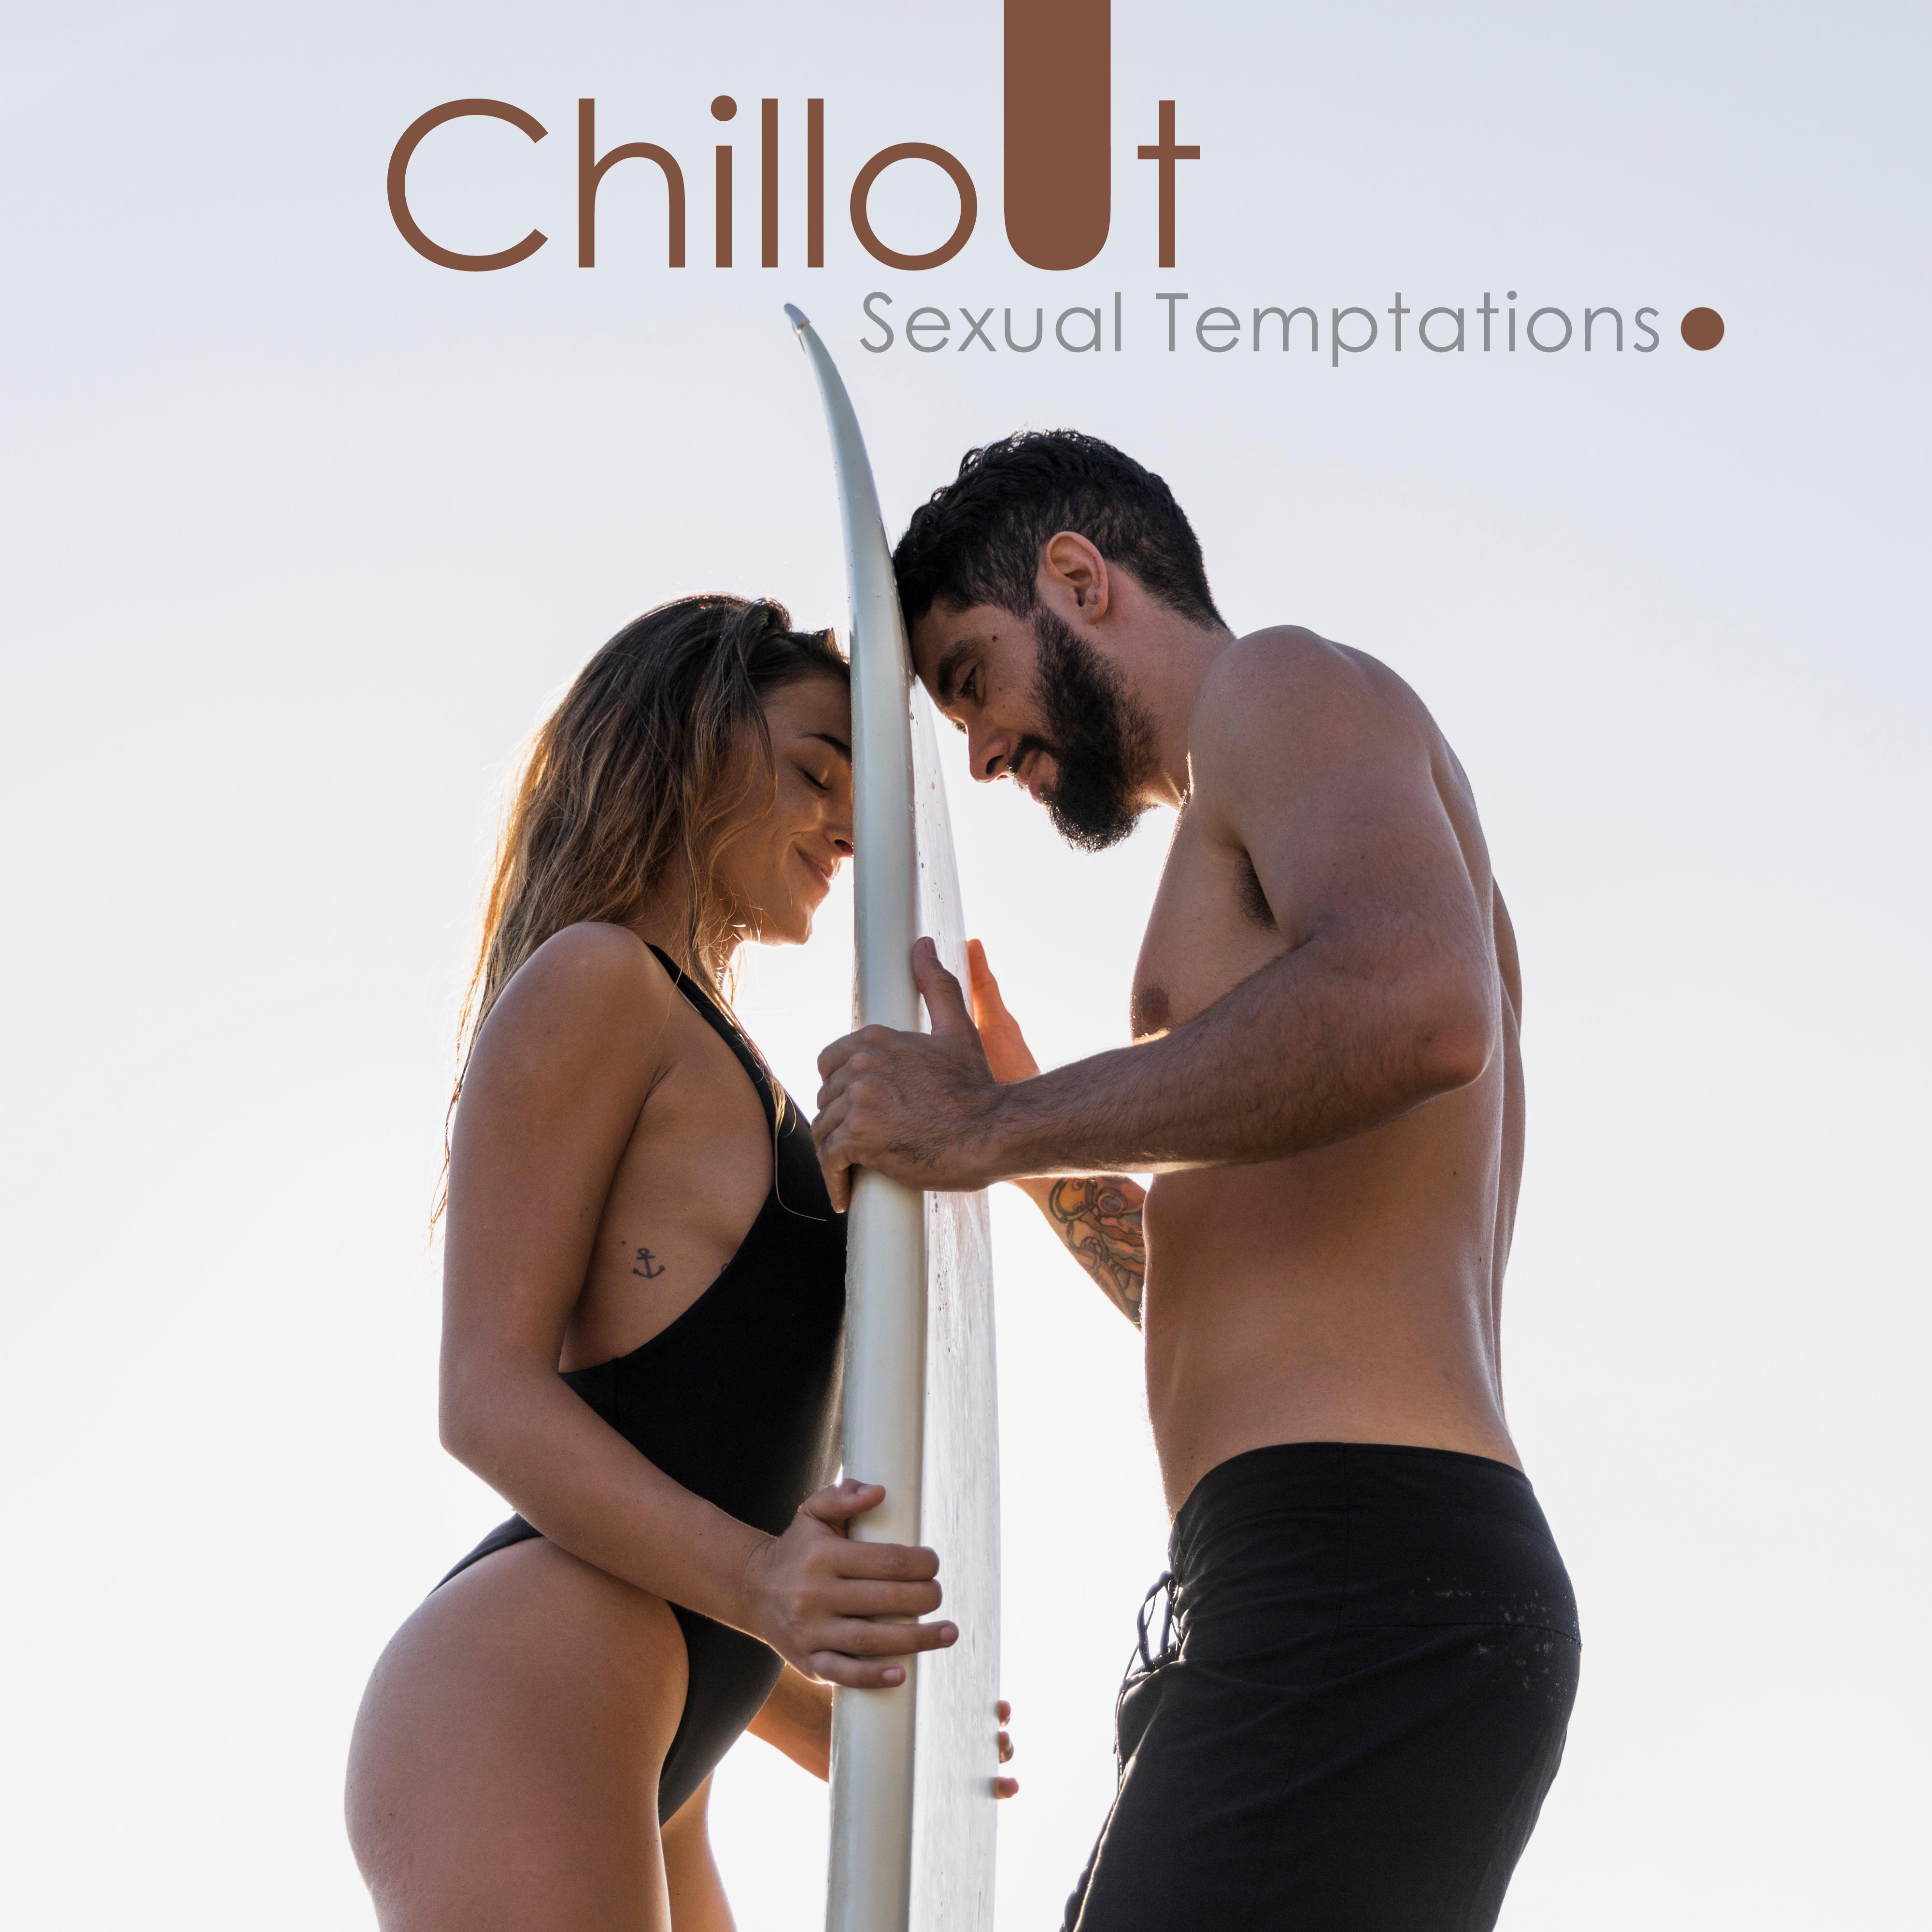 Chillout ****** Temptations: 2019 Chill Out Erotic Music, Songs for Massage & Tantric ***, Evening Full of Pleasures, Intimate Moments Vibes